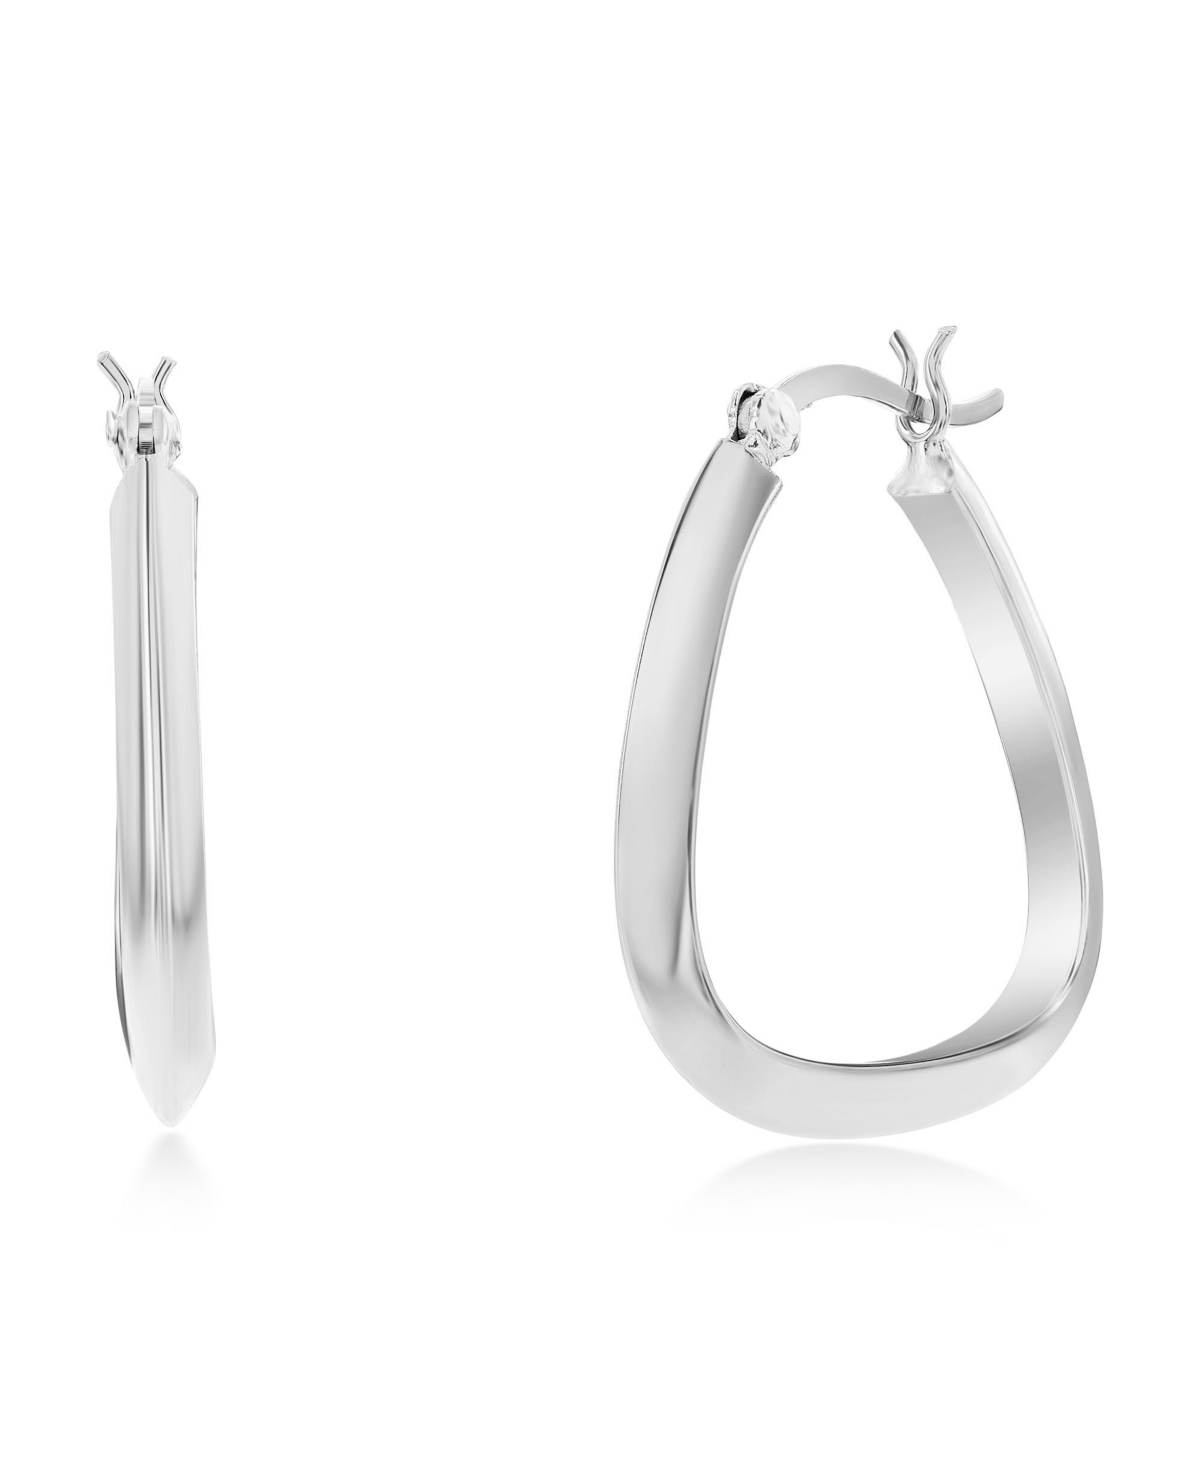 Sterling Silver or Gold Plated over Sterling Silver 27mm Triangle-Shaped Hoop Earrings - Silver